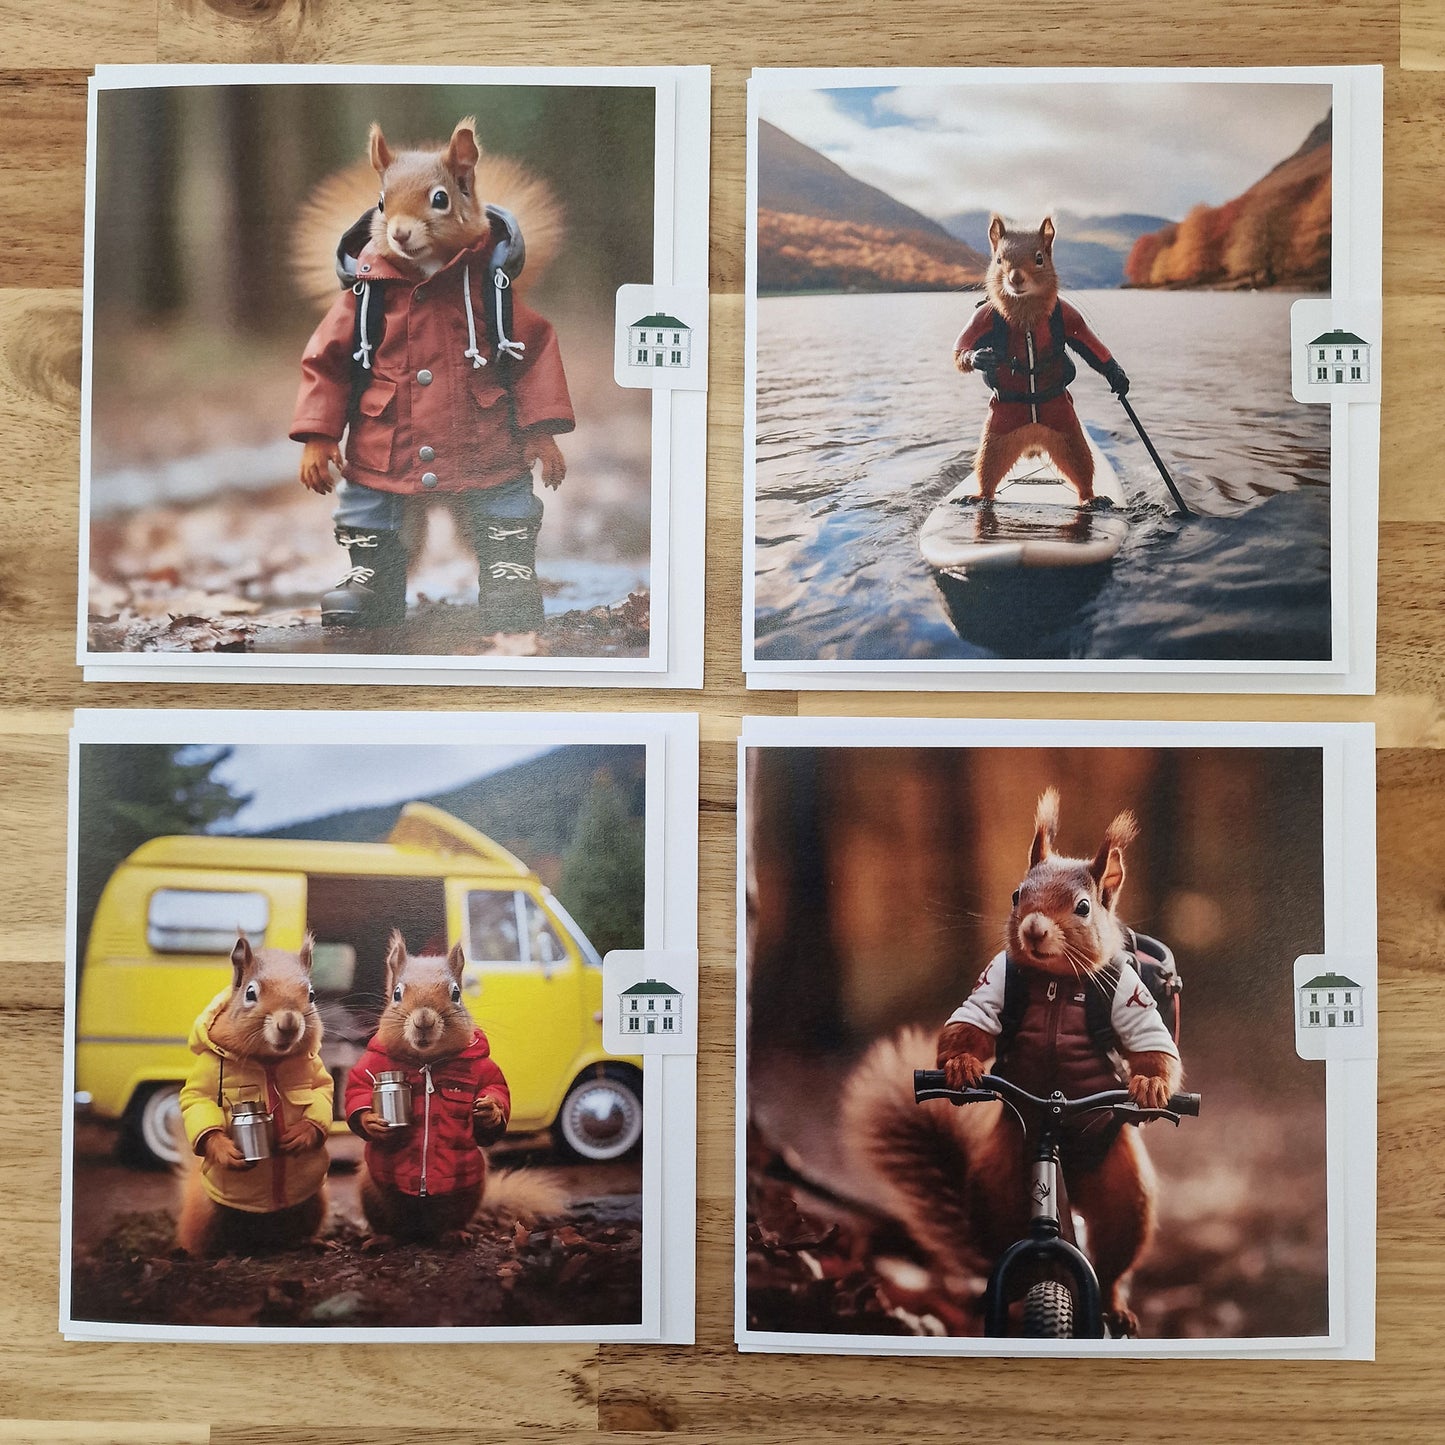 Four cards showing pictures of red squirrels doing outdoor activities, including walking, paddleboarding, campervan, biking